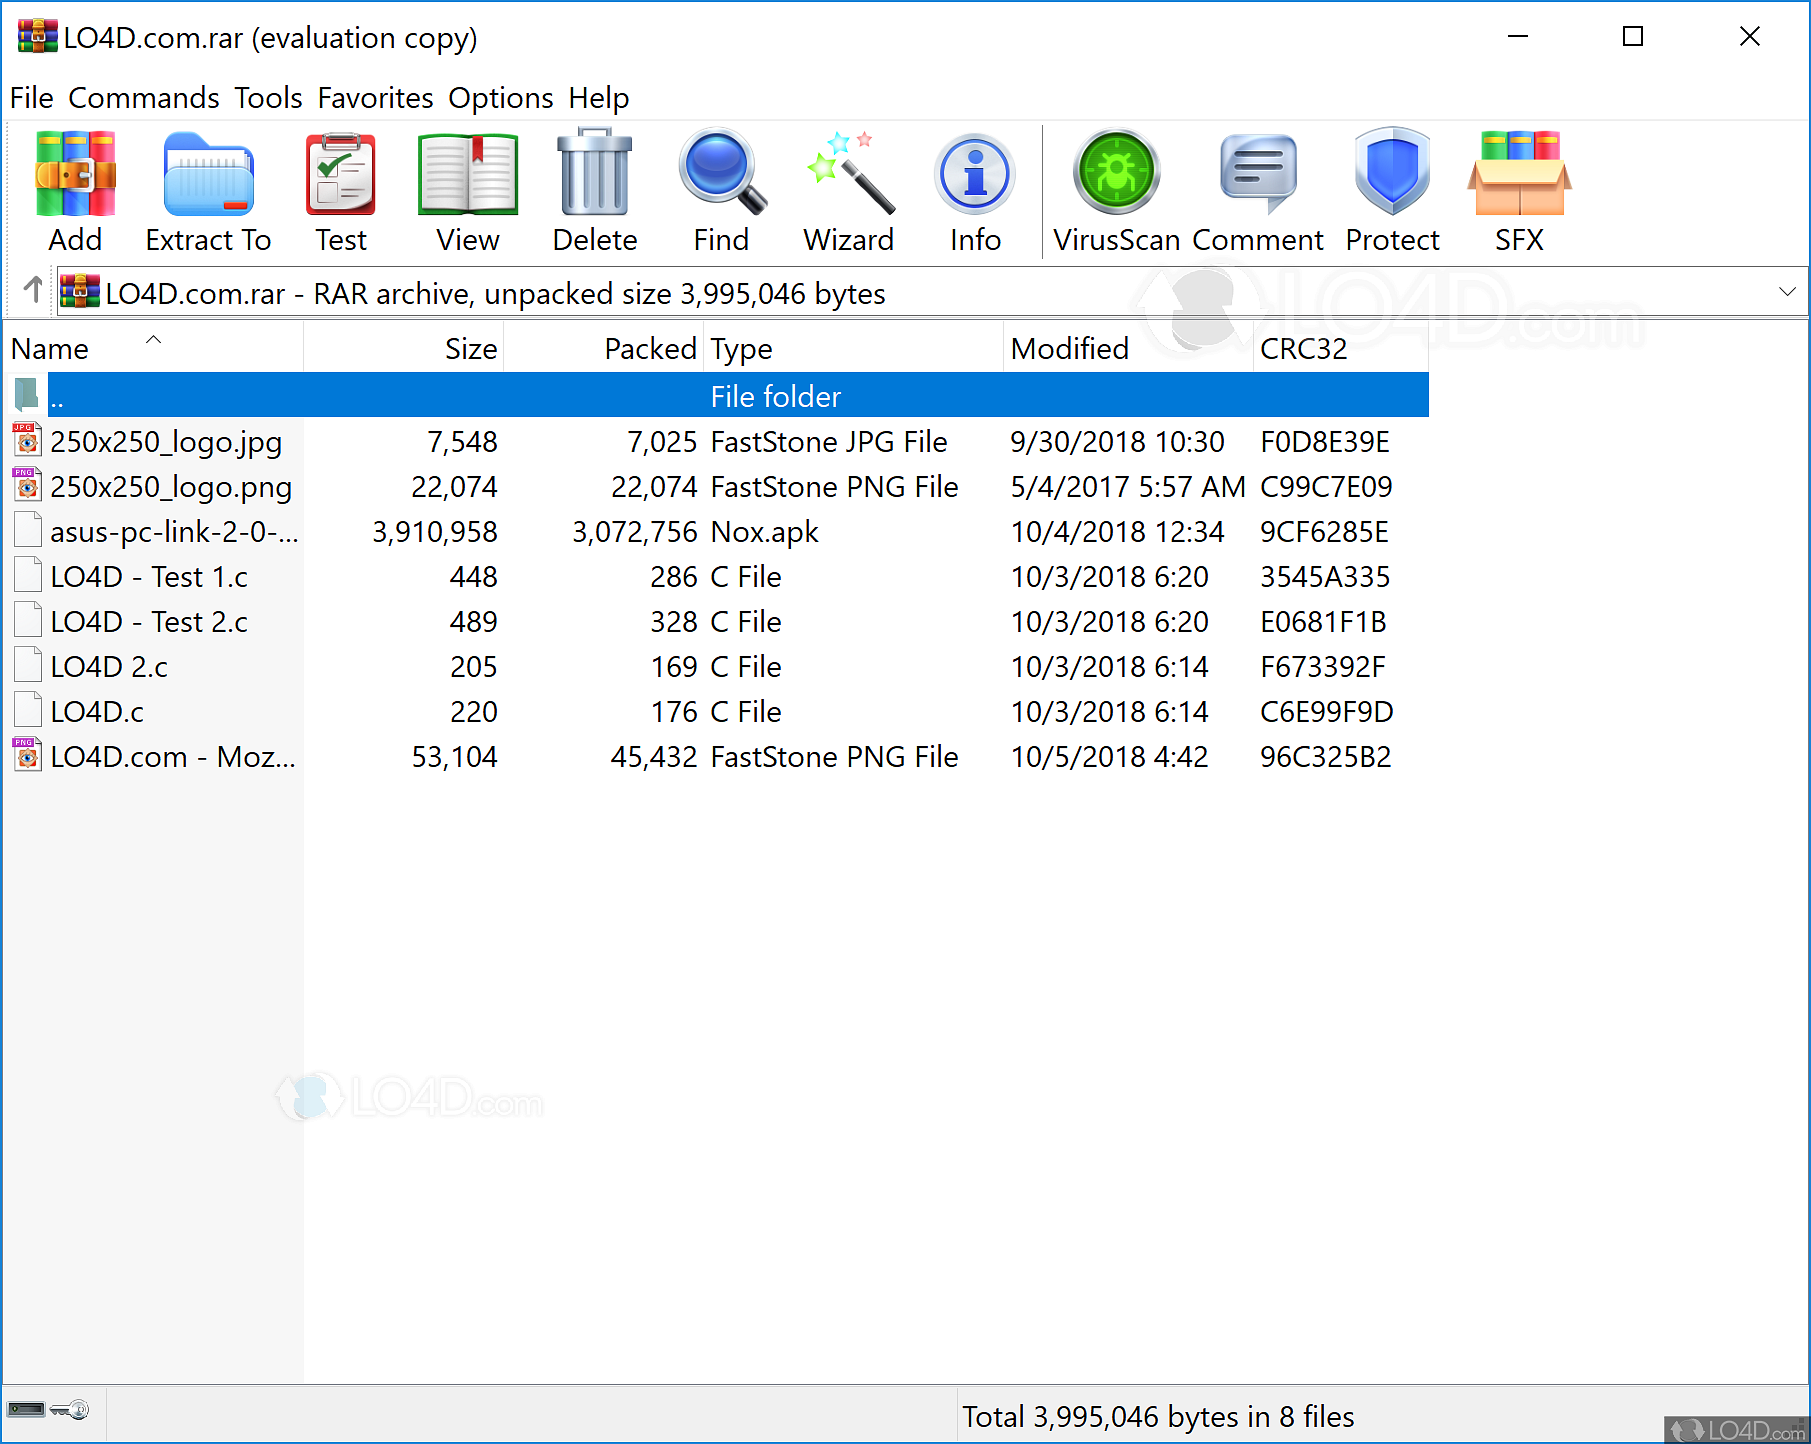 winrar software direct download